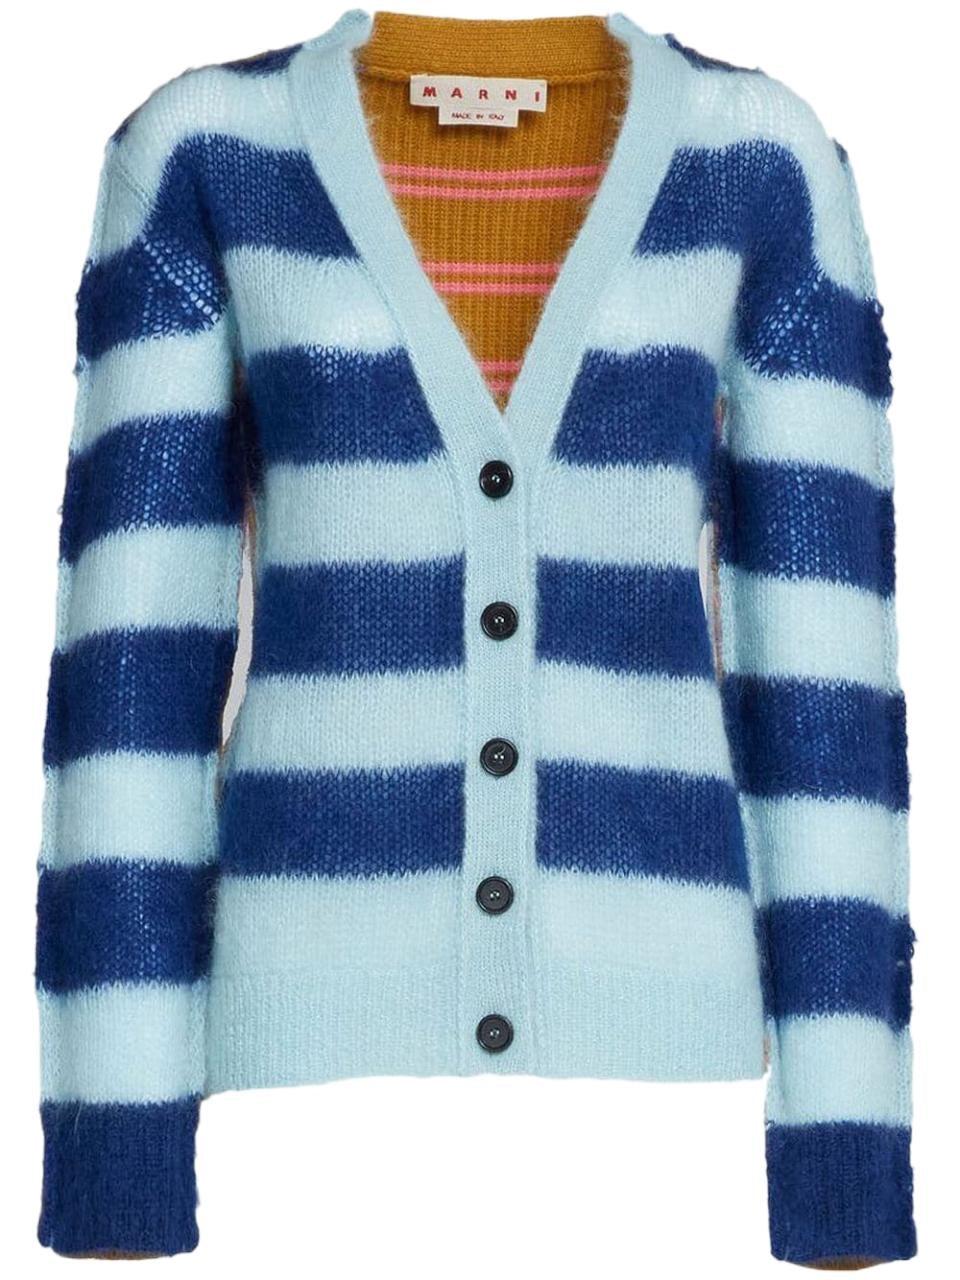 Marni Striped Panelled Cardigan in Blue | Lyst